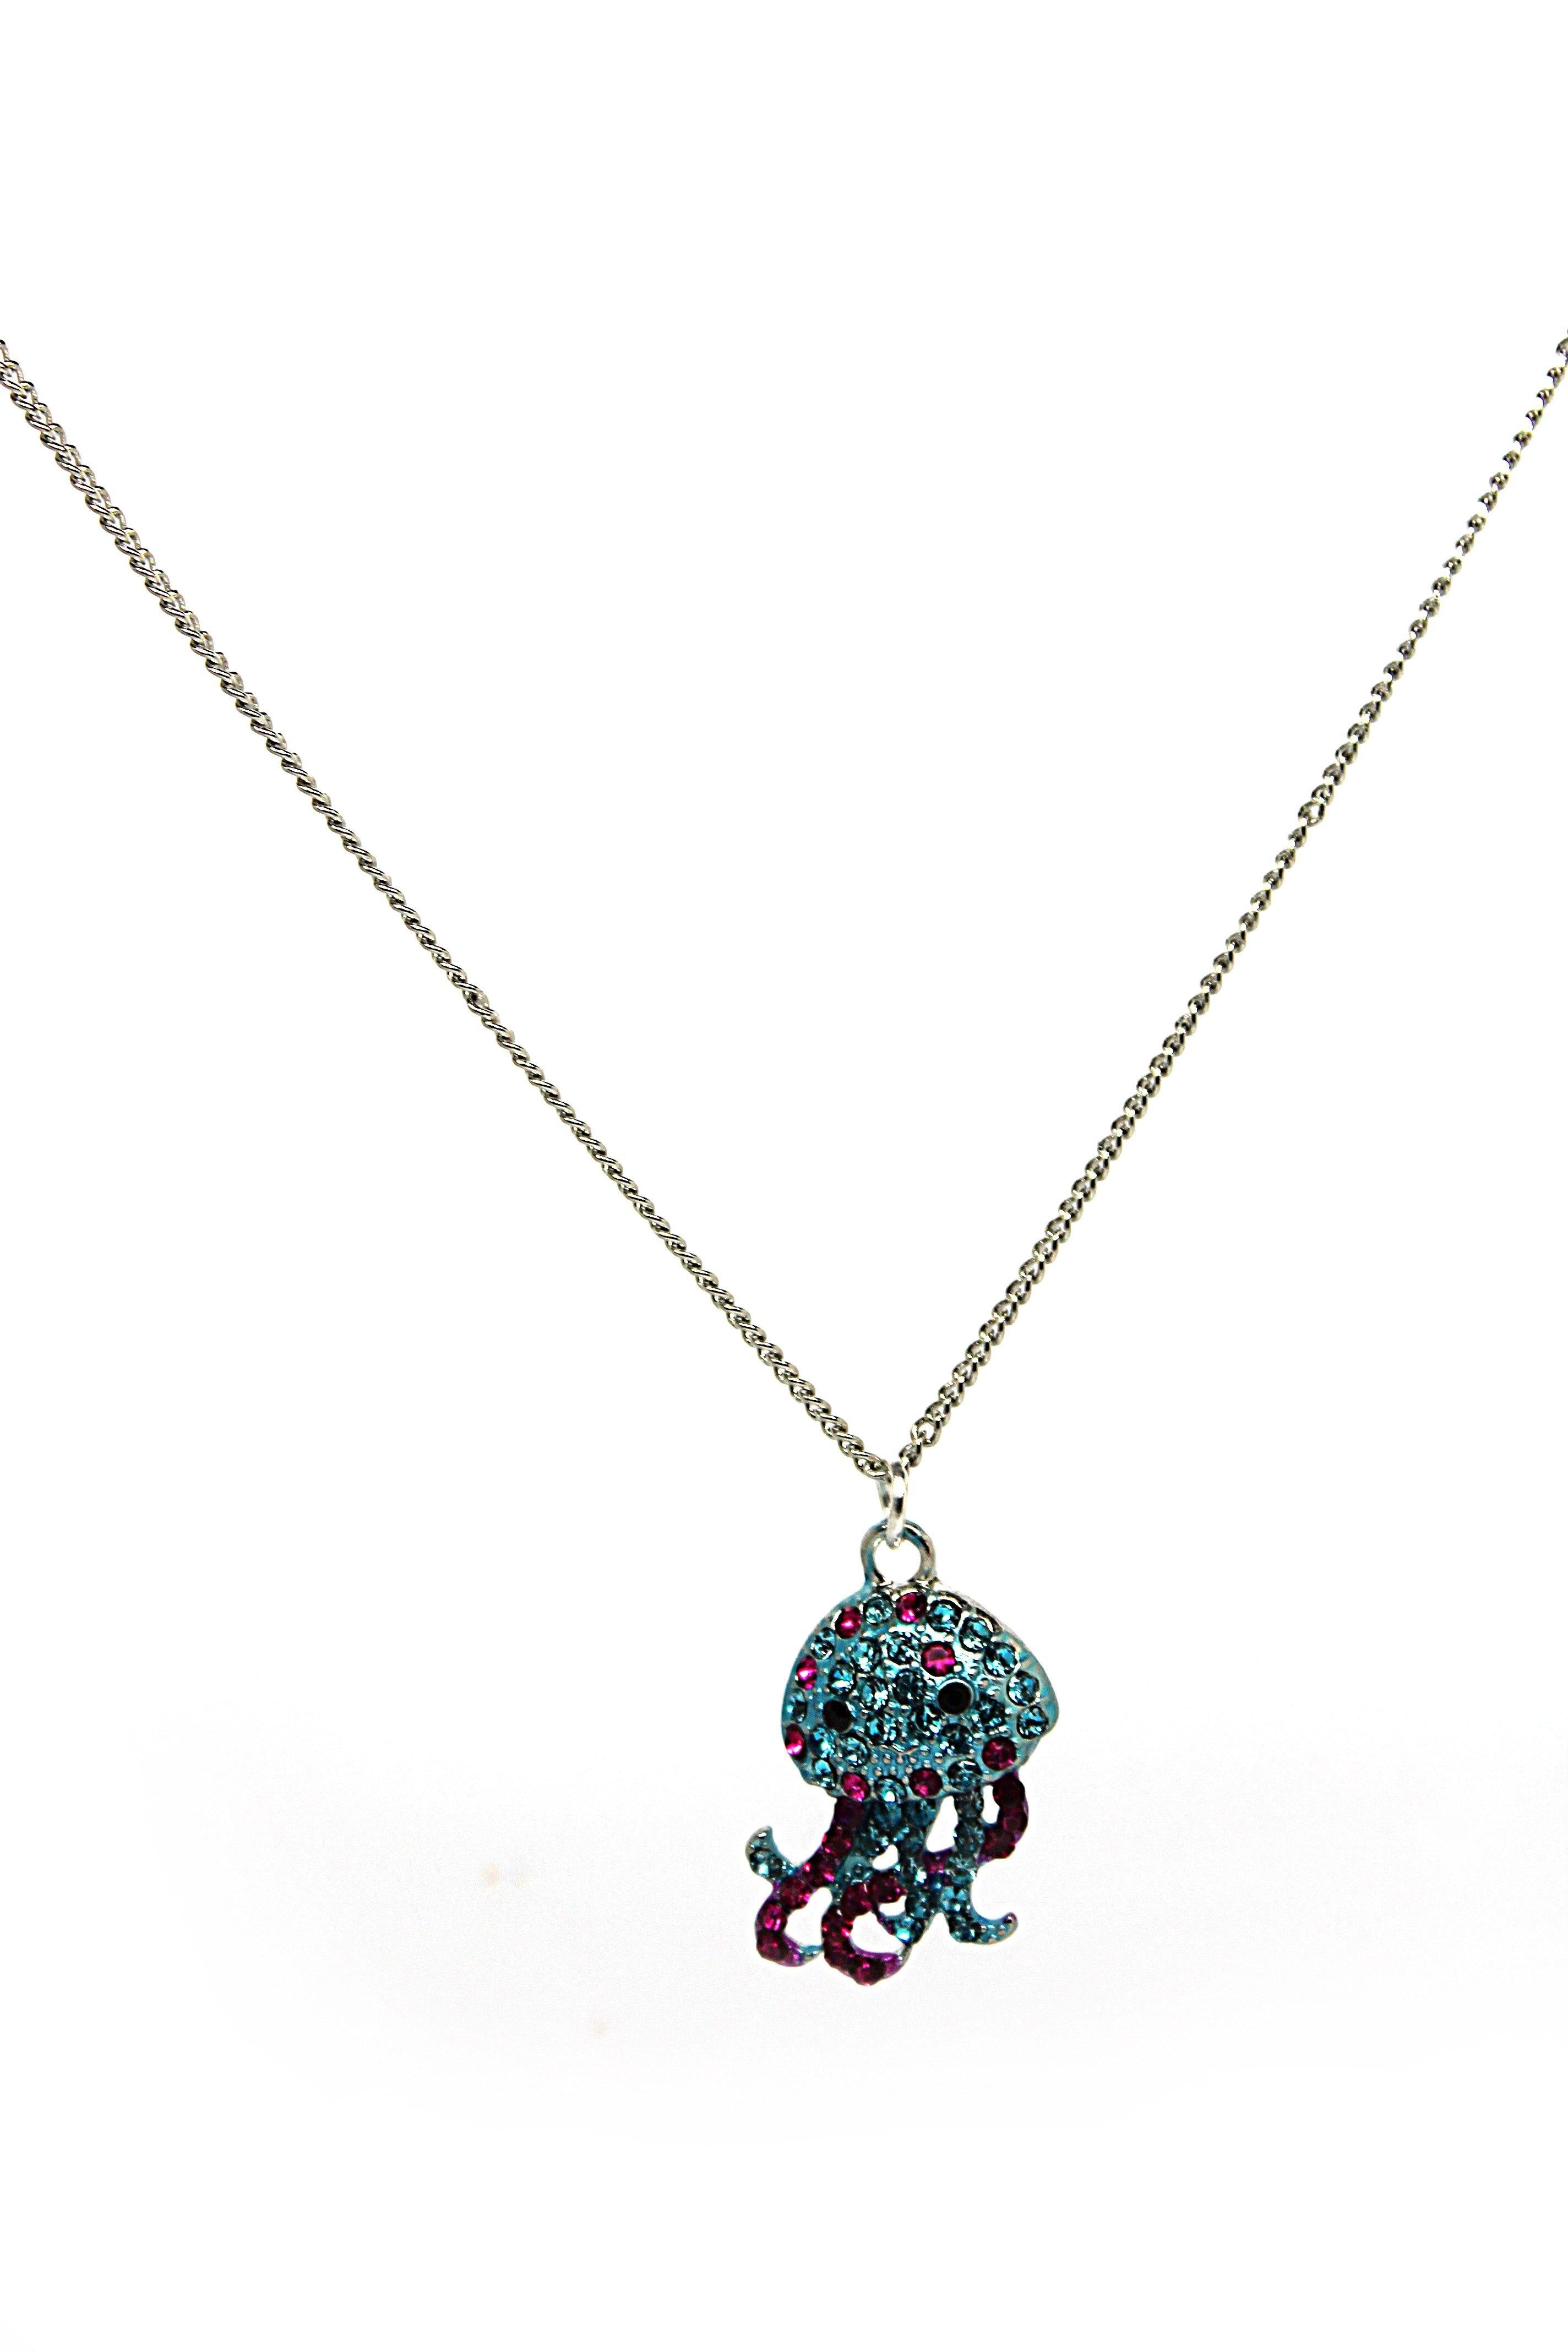 Jelly Fish Blue Necklace - Wildtouch - Wildtouch